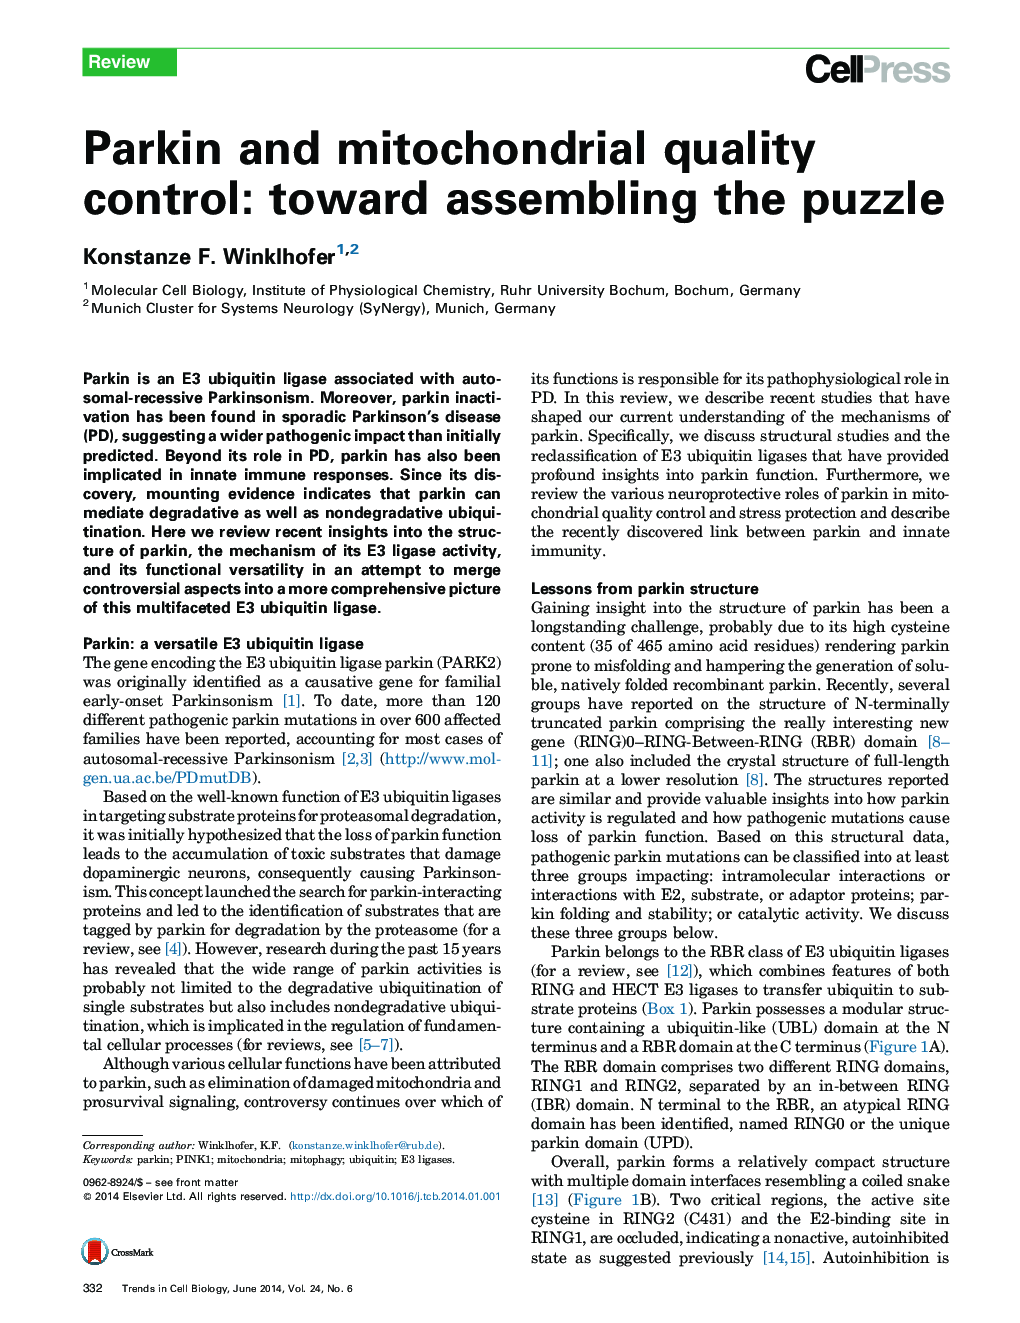 Parkin and mitochondrial quality control: toward assembling the puzzle